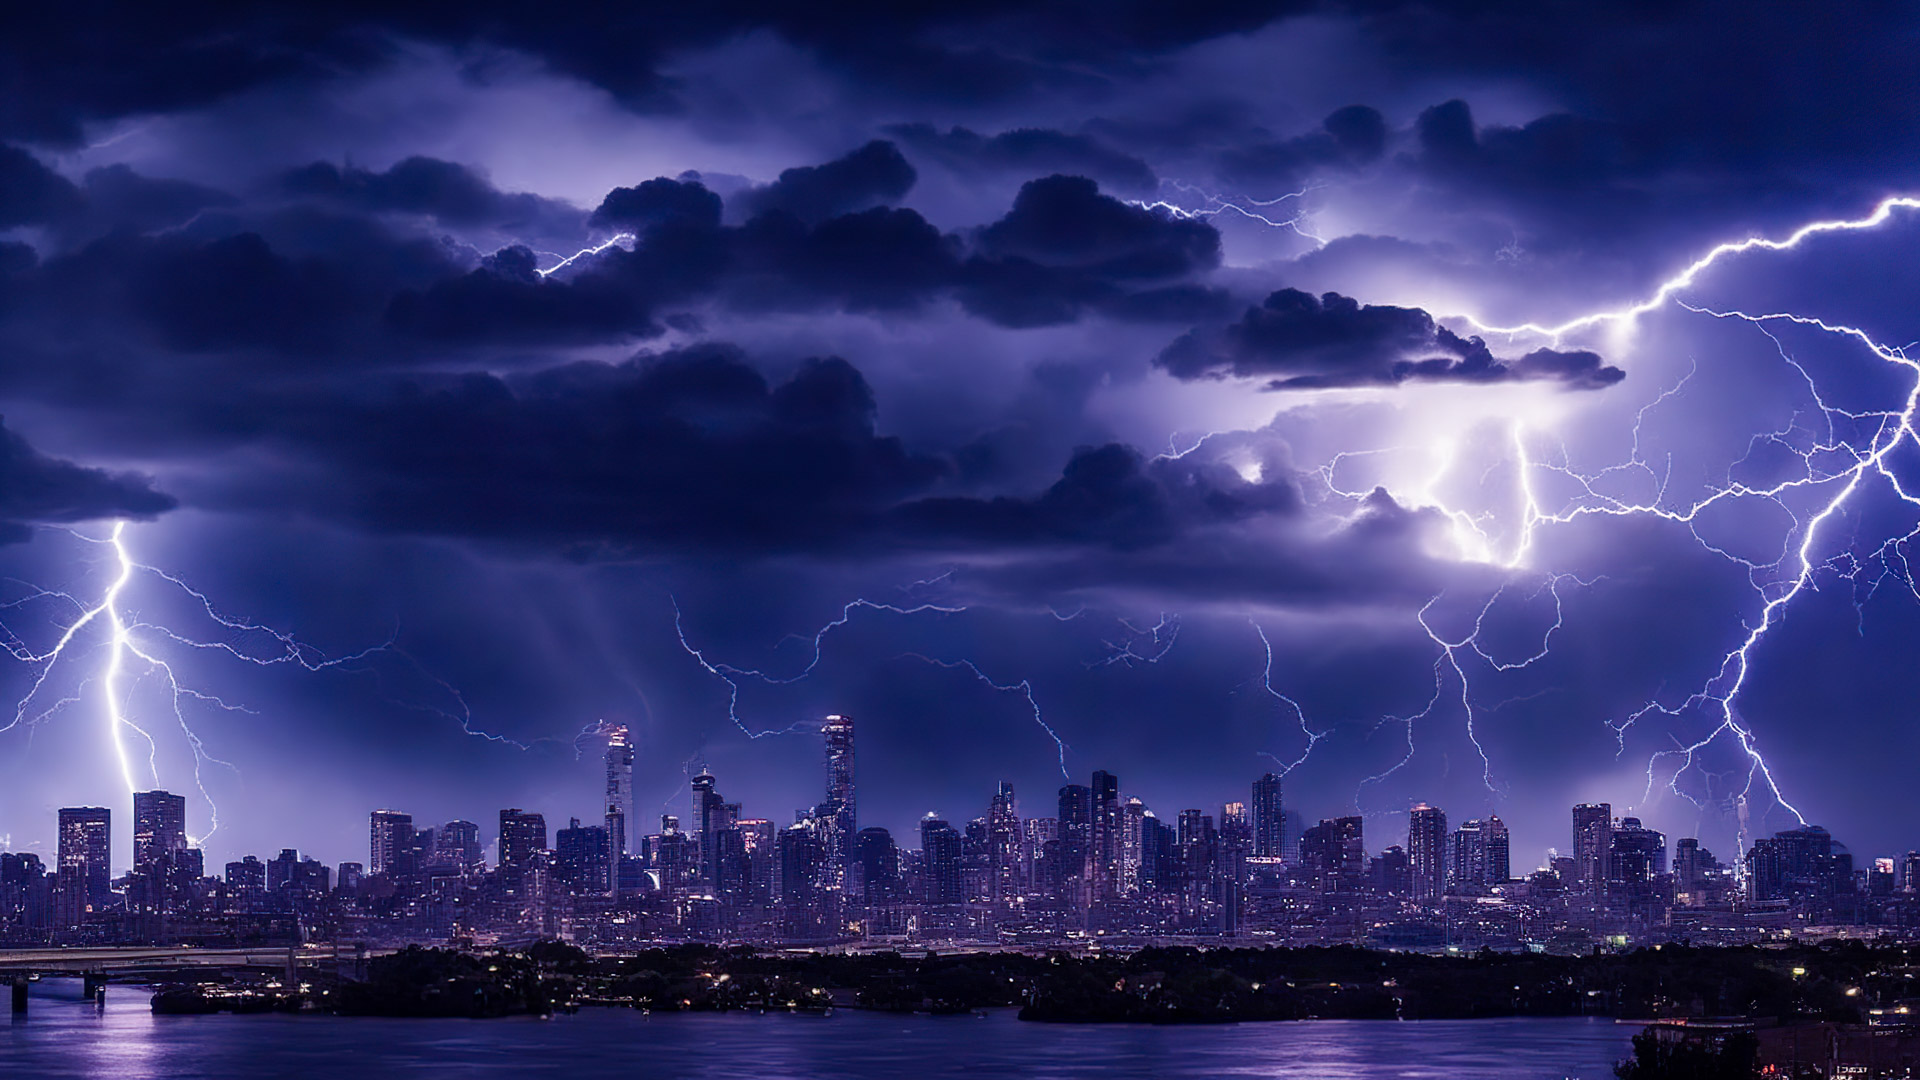 Experience the drama of our HD nature wallpapers in 1080p, featuring an epic thunderstorm brewing over a city skyline, with lightning bolts illuminating the dark clouds.